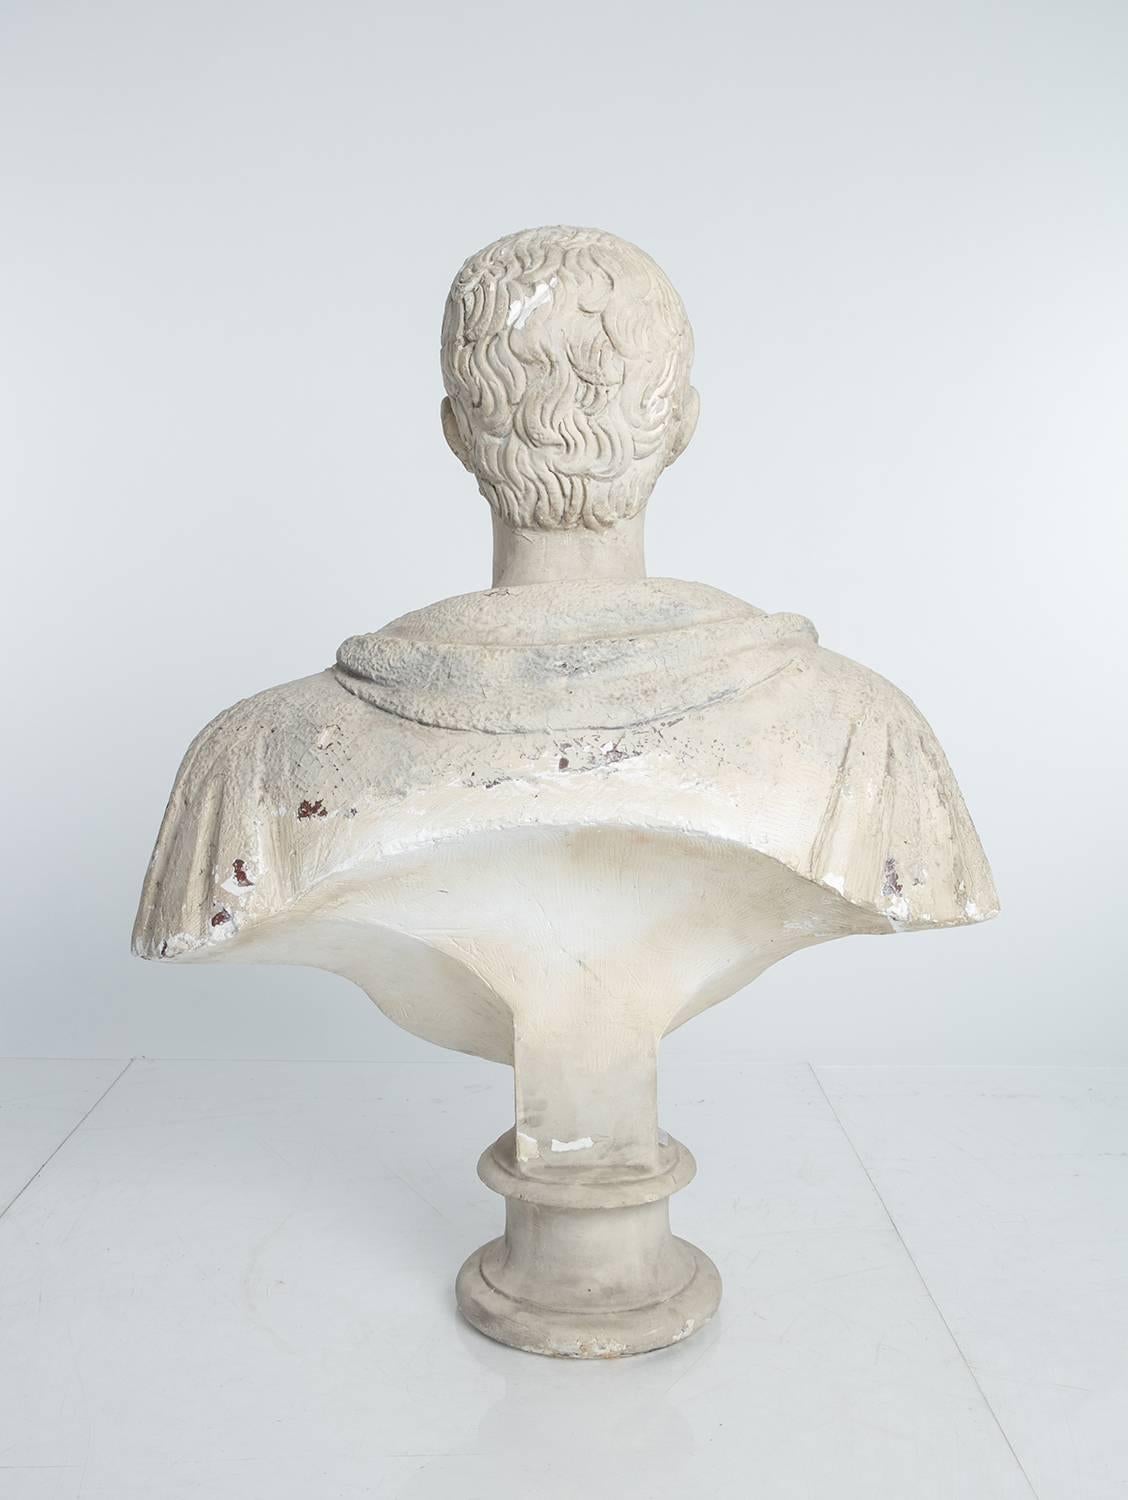 Plaster portrait bust of a Roman Patrician. Neoclassical in feeling and likely used in a theatrical set.